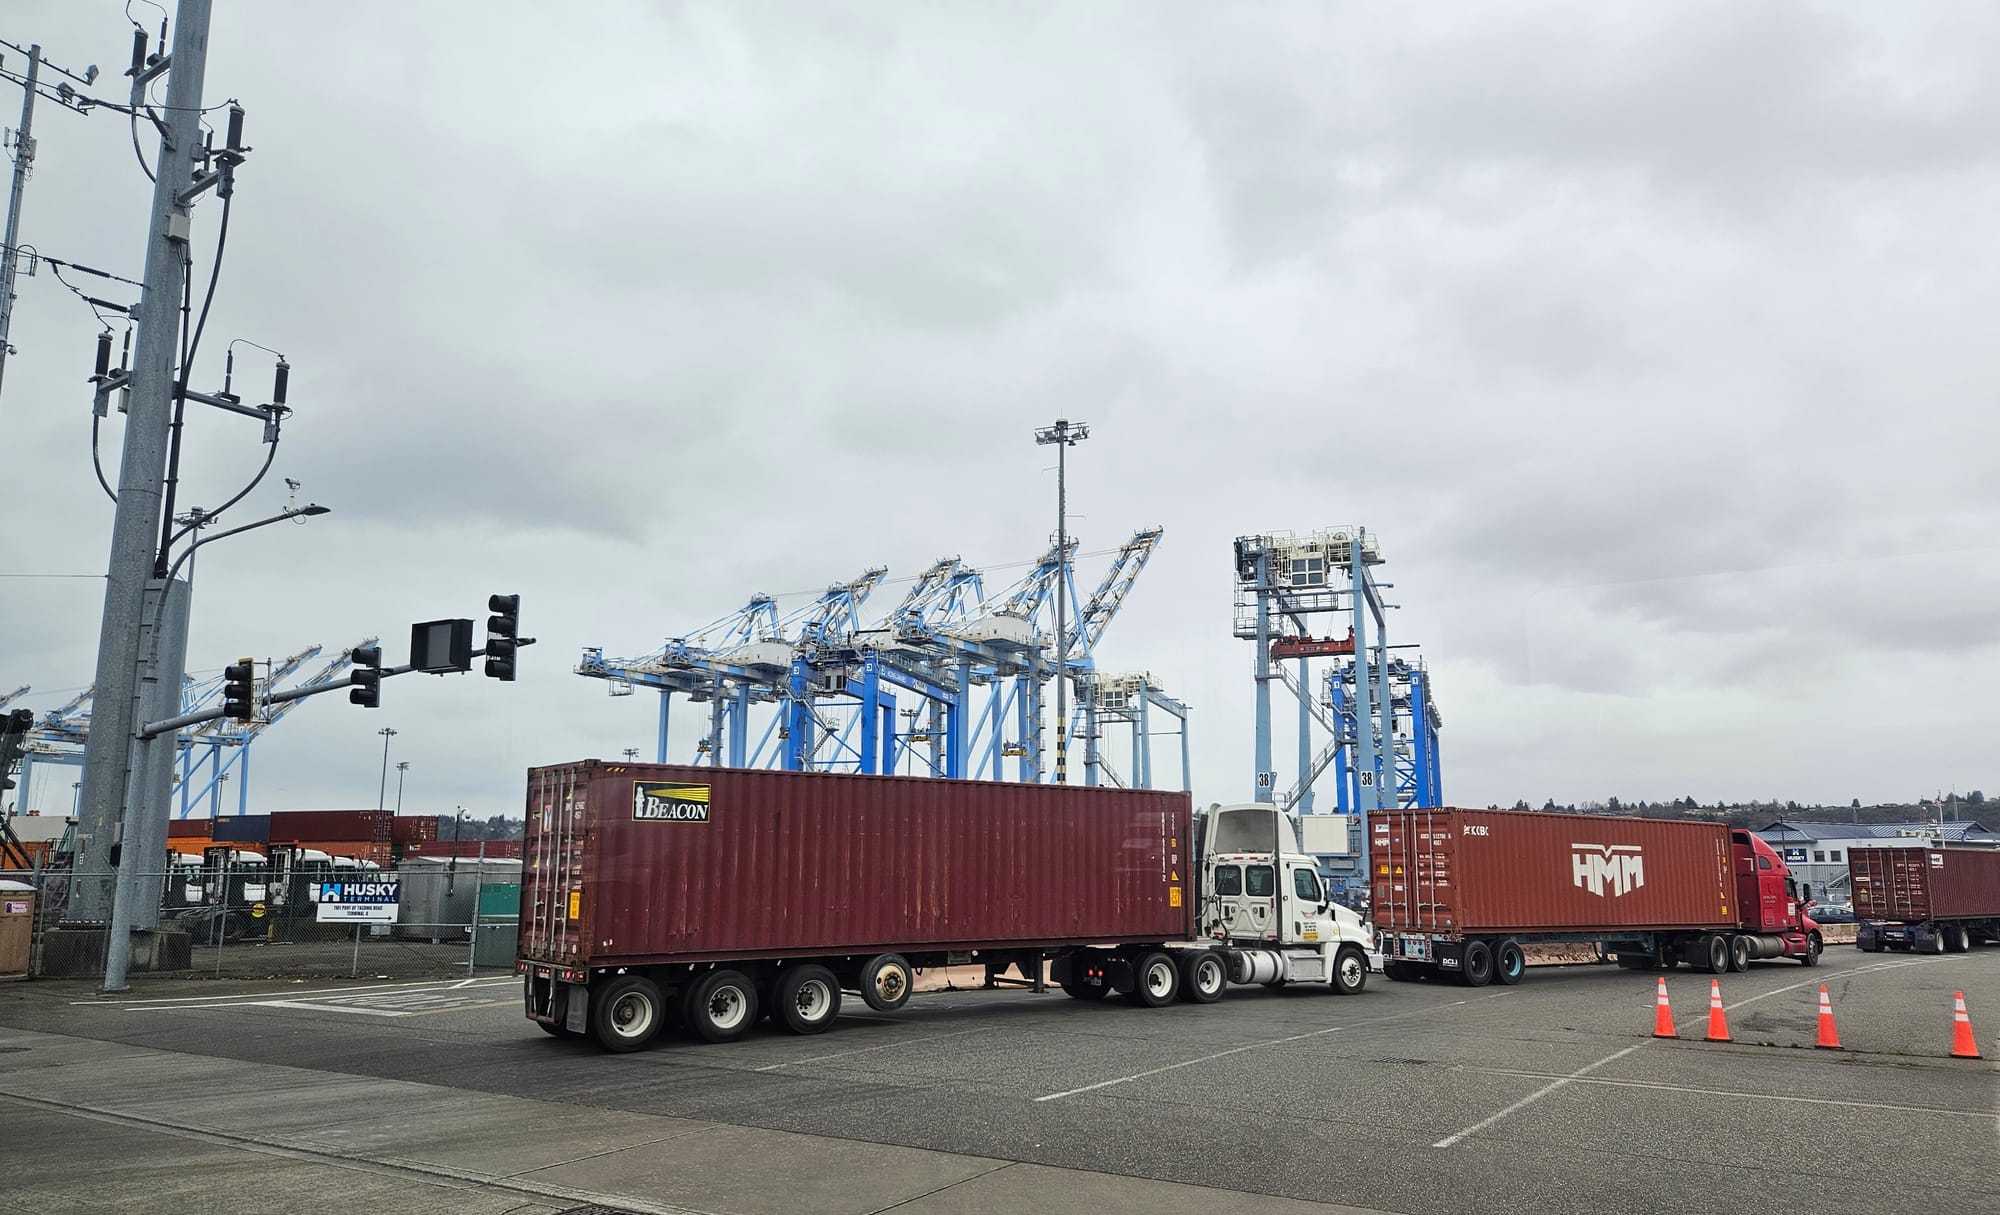 Touring the Port of Tacoma